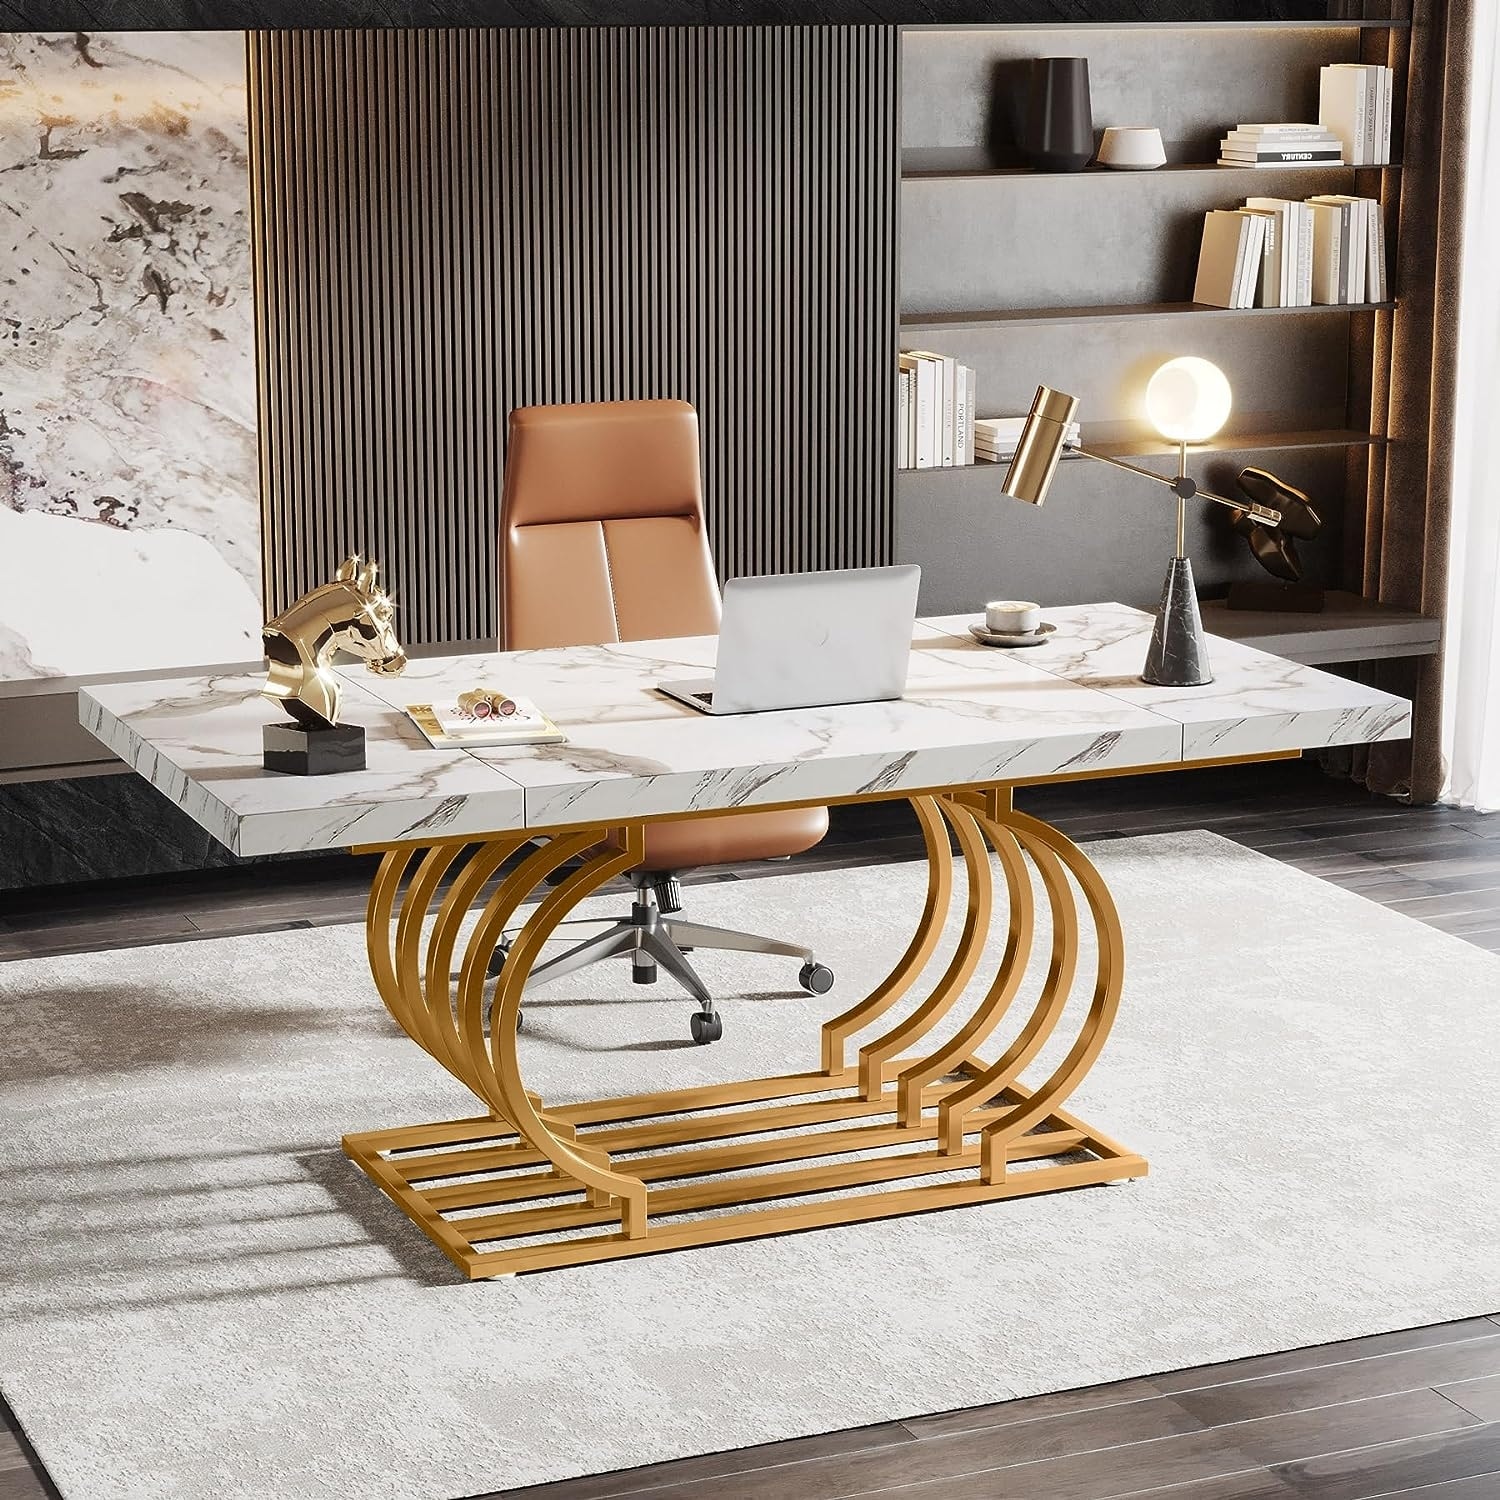 63 Modern Office Desk with Drawer Writing Desk with Abstract